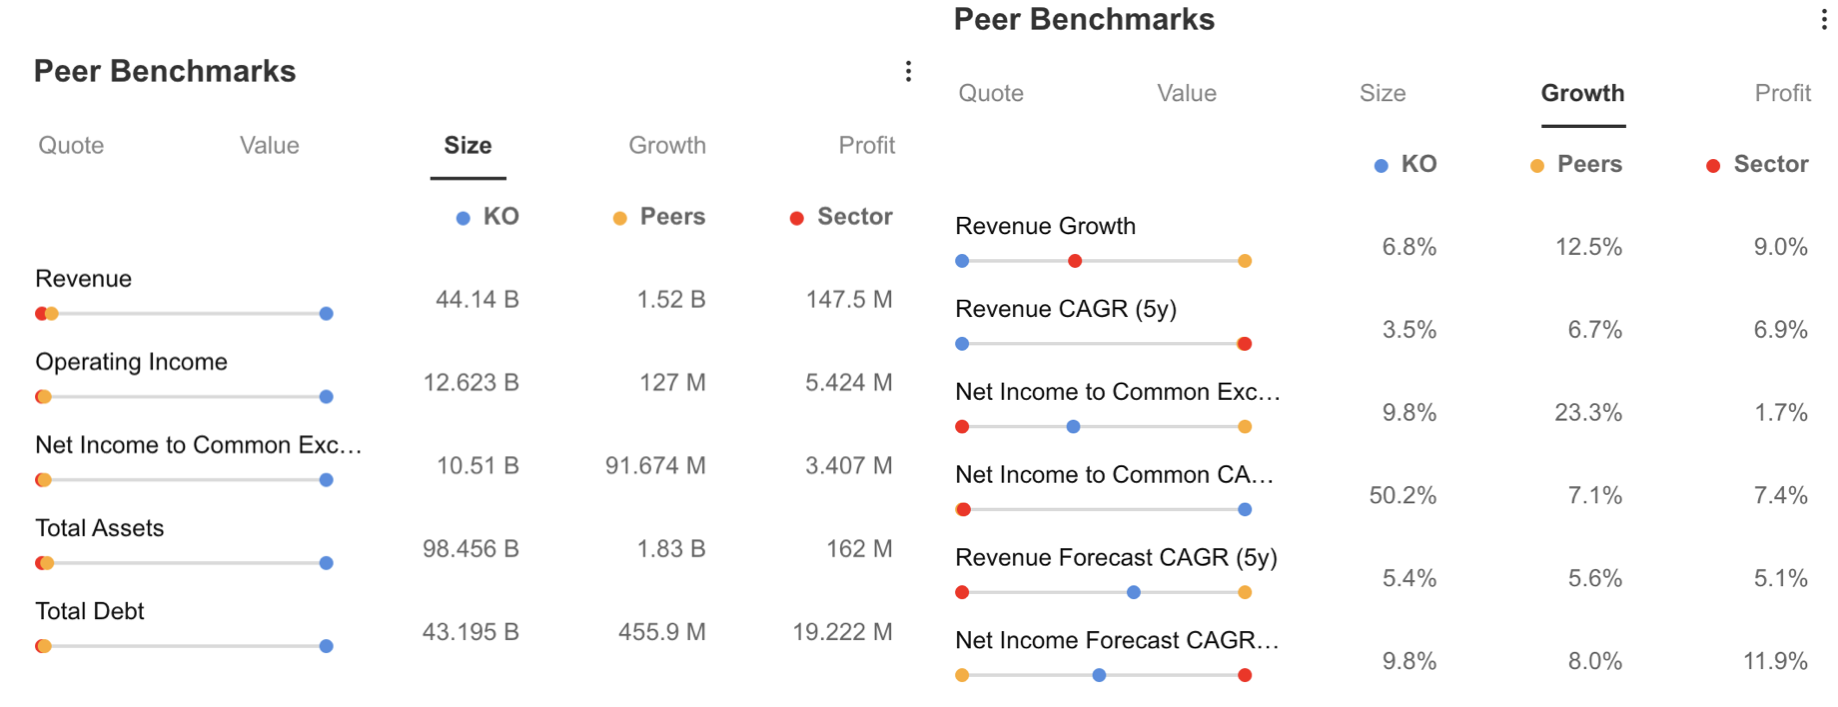 Peer Benchmarks - Growth, Size